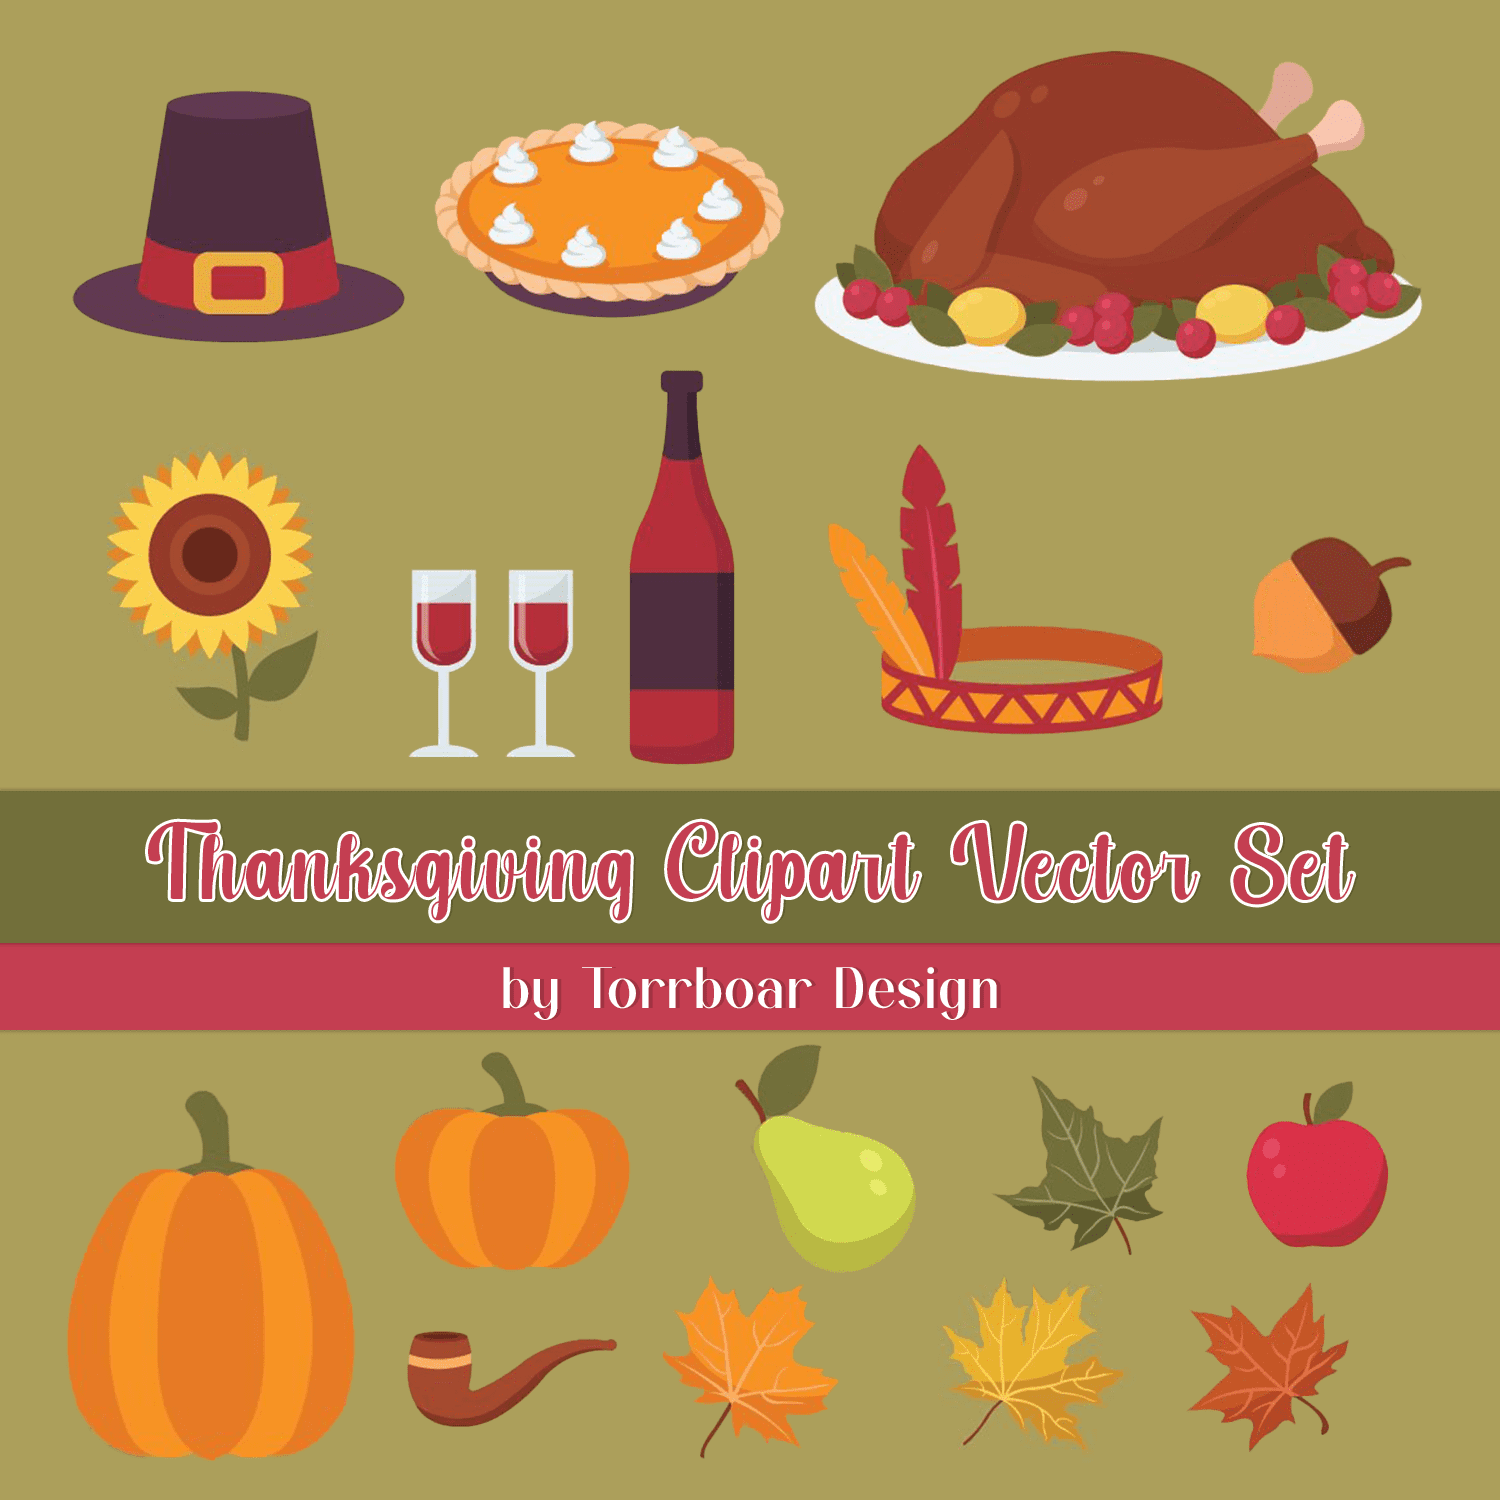 Thanksgiving Clipart Vector Set cover.